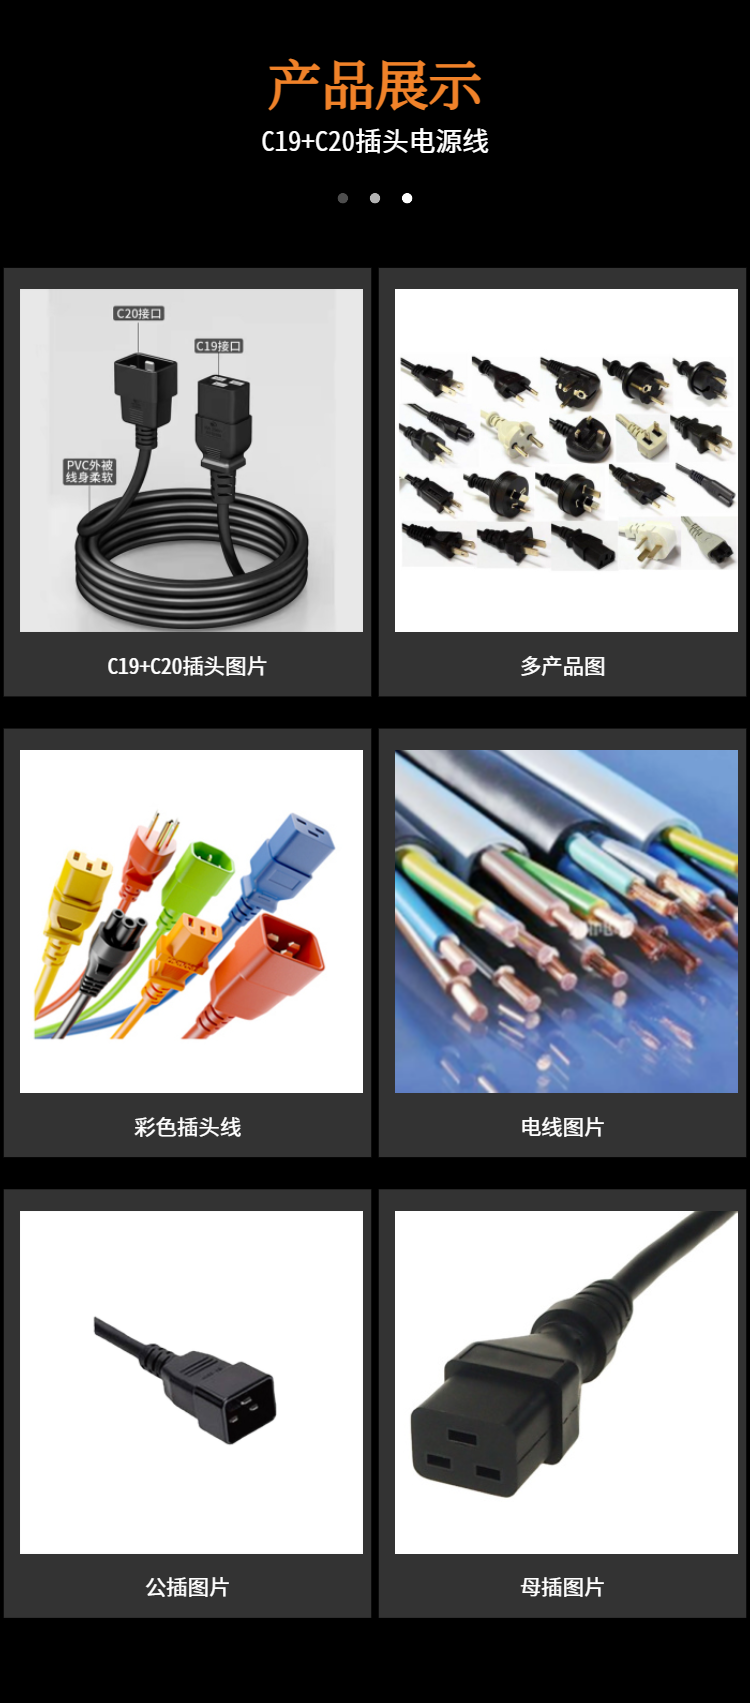 High temperature resistant male and female plug power cord, safe and durable electrical equipment, color plug cable, Guomu Electronics